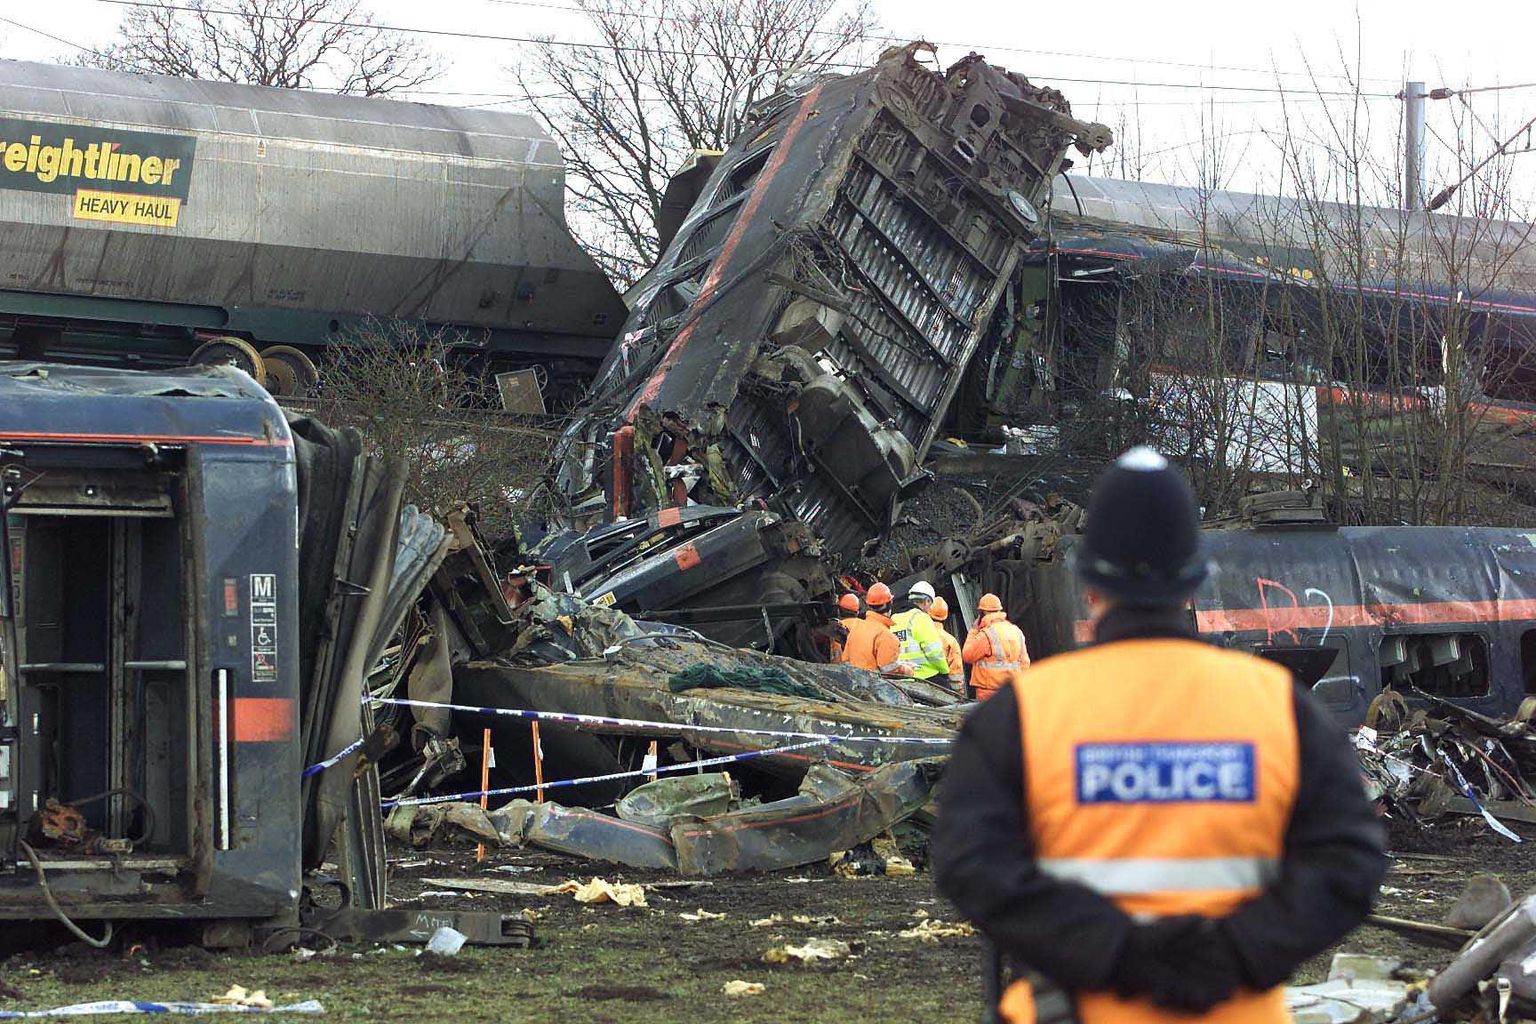 Great Heck rail crash 23 years on as North Yorkshire tragedy remembered 